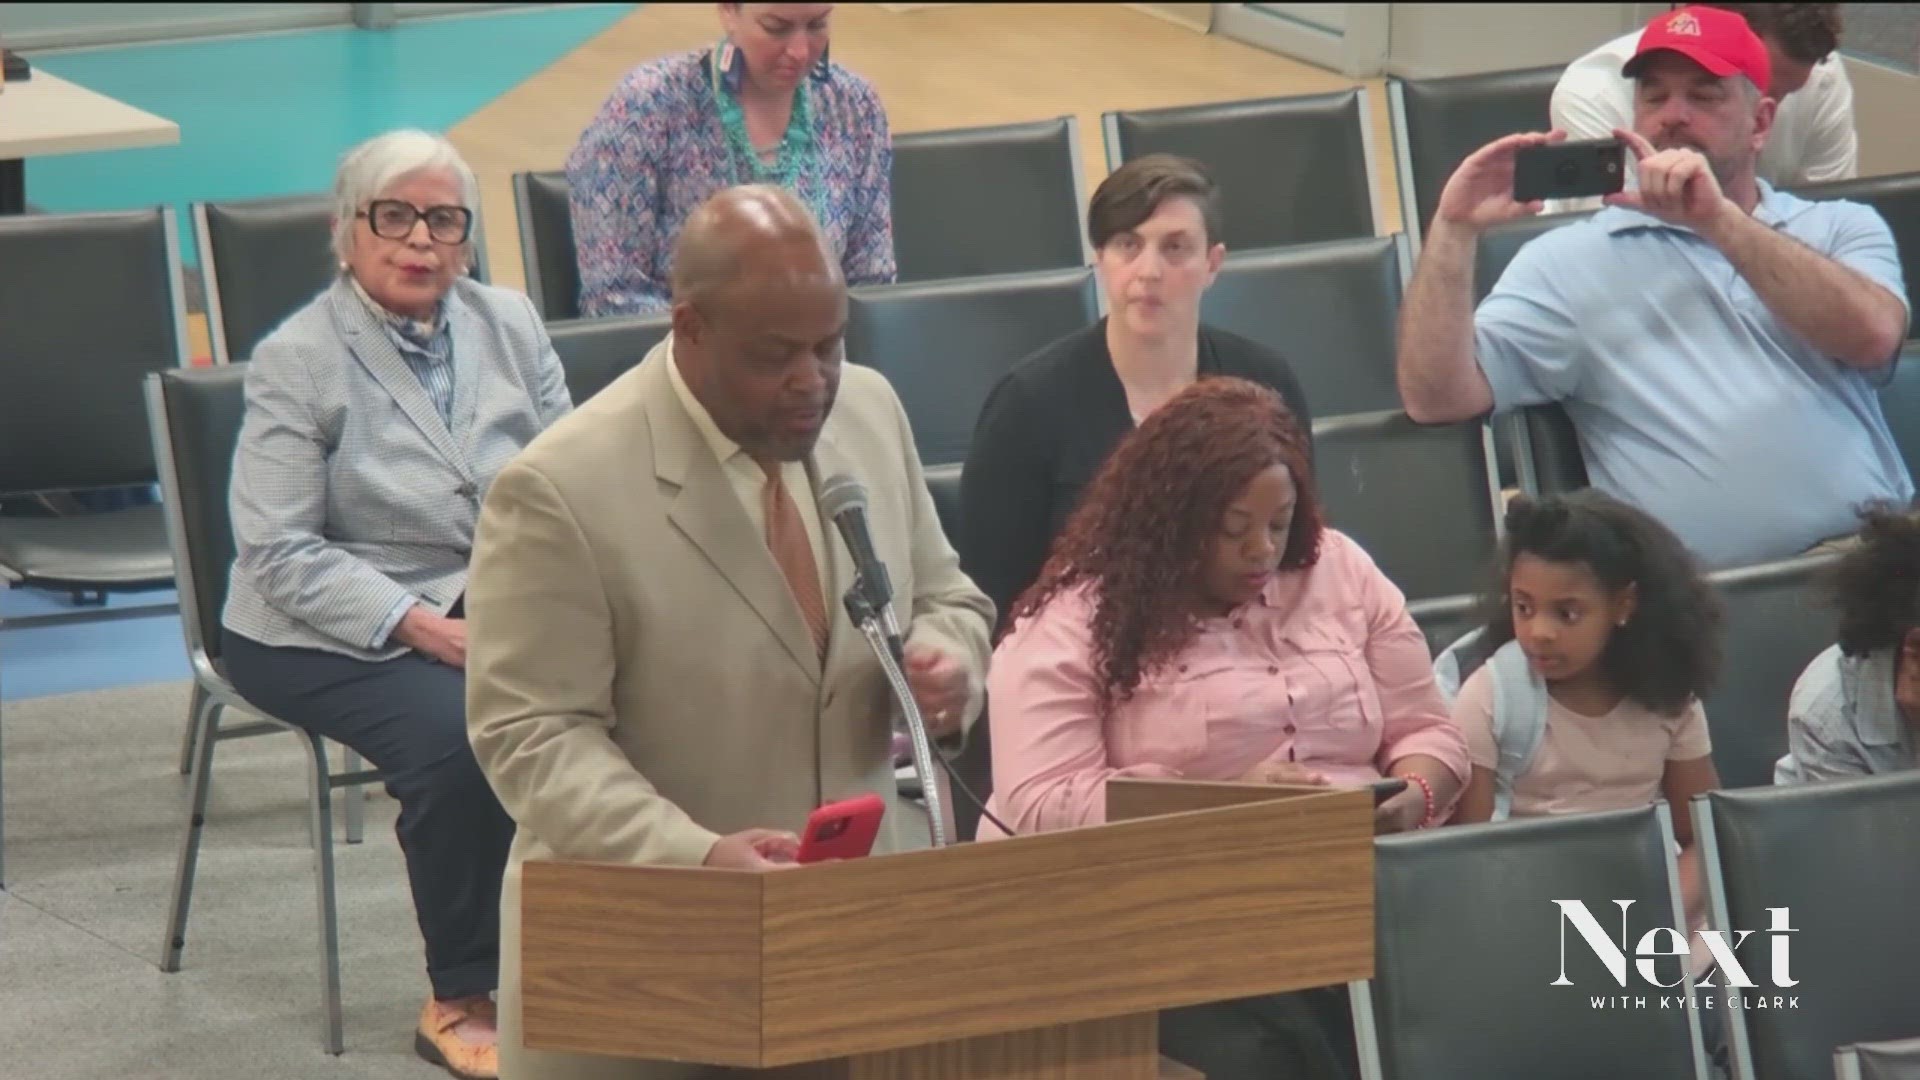 At a school board public comment session, a former employee claimed the DPS superintendent is mandating that district employees sign confidentiality agreements.